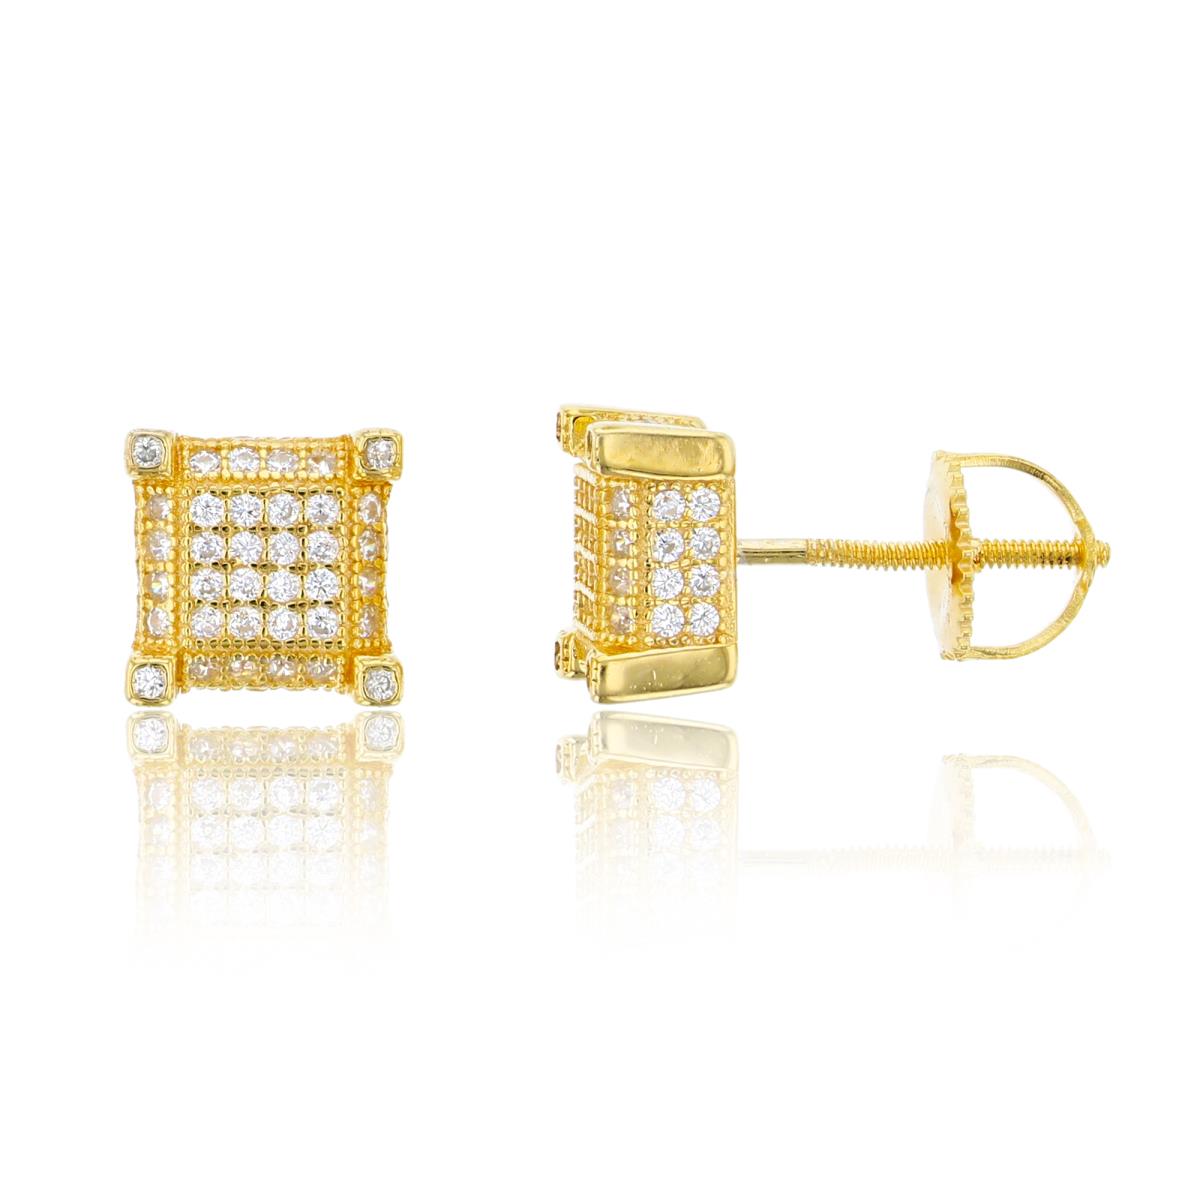 Sterling Silver Yellow 8x8mm 3D Square Micropave Screwback Stud Earring